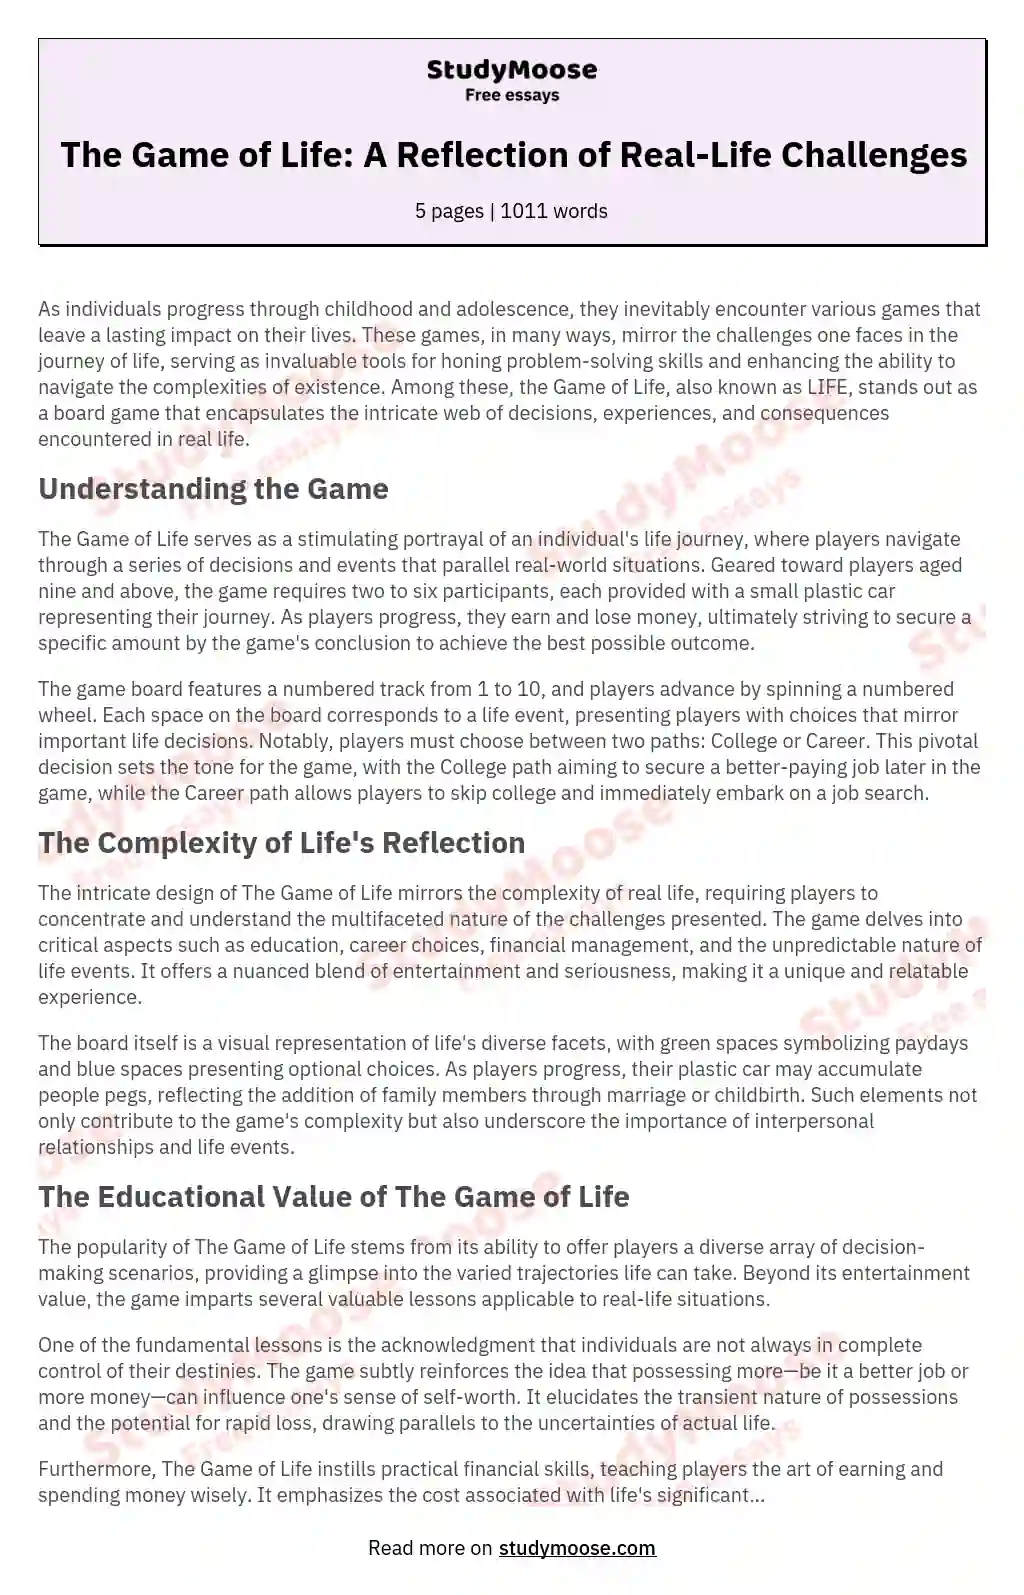 The Game of Life: A Reflection of Real-Life Challenges essay